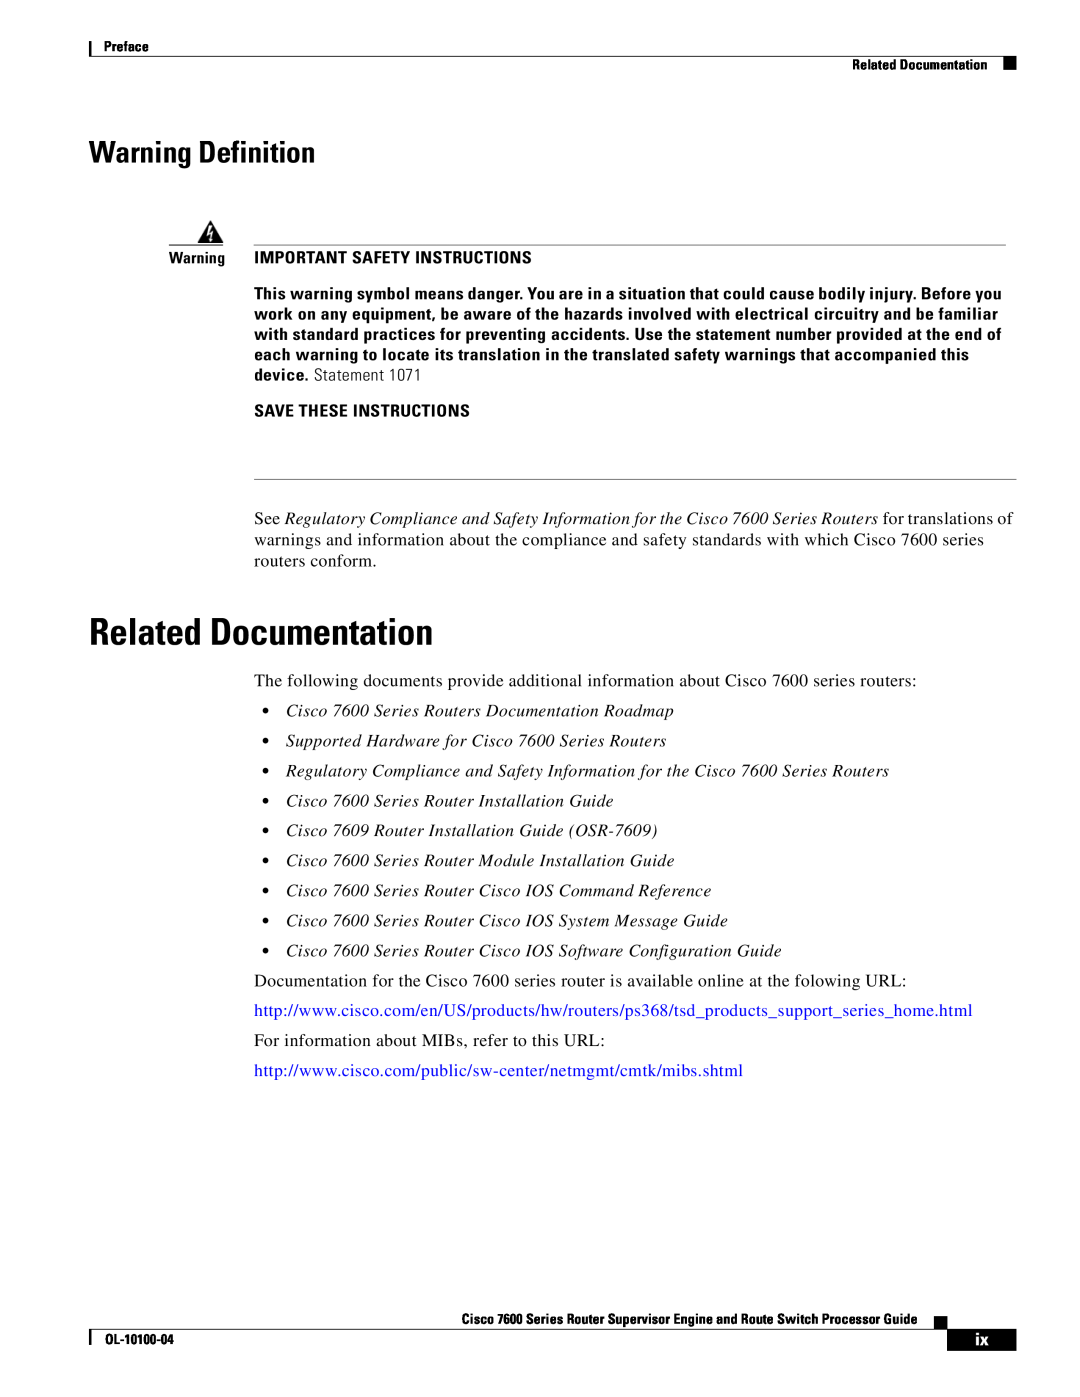 Cisco Systems manual Related Documentation, Warning Definition, Cisco 7600 Series Routers Documentation Roadmap 